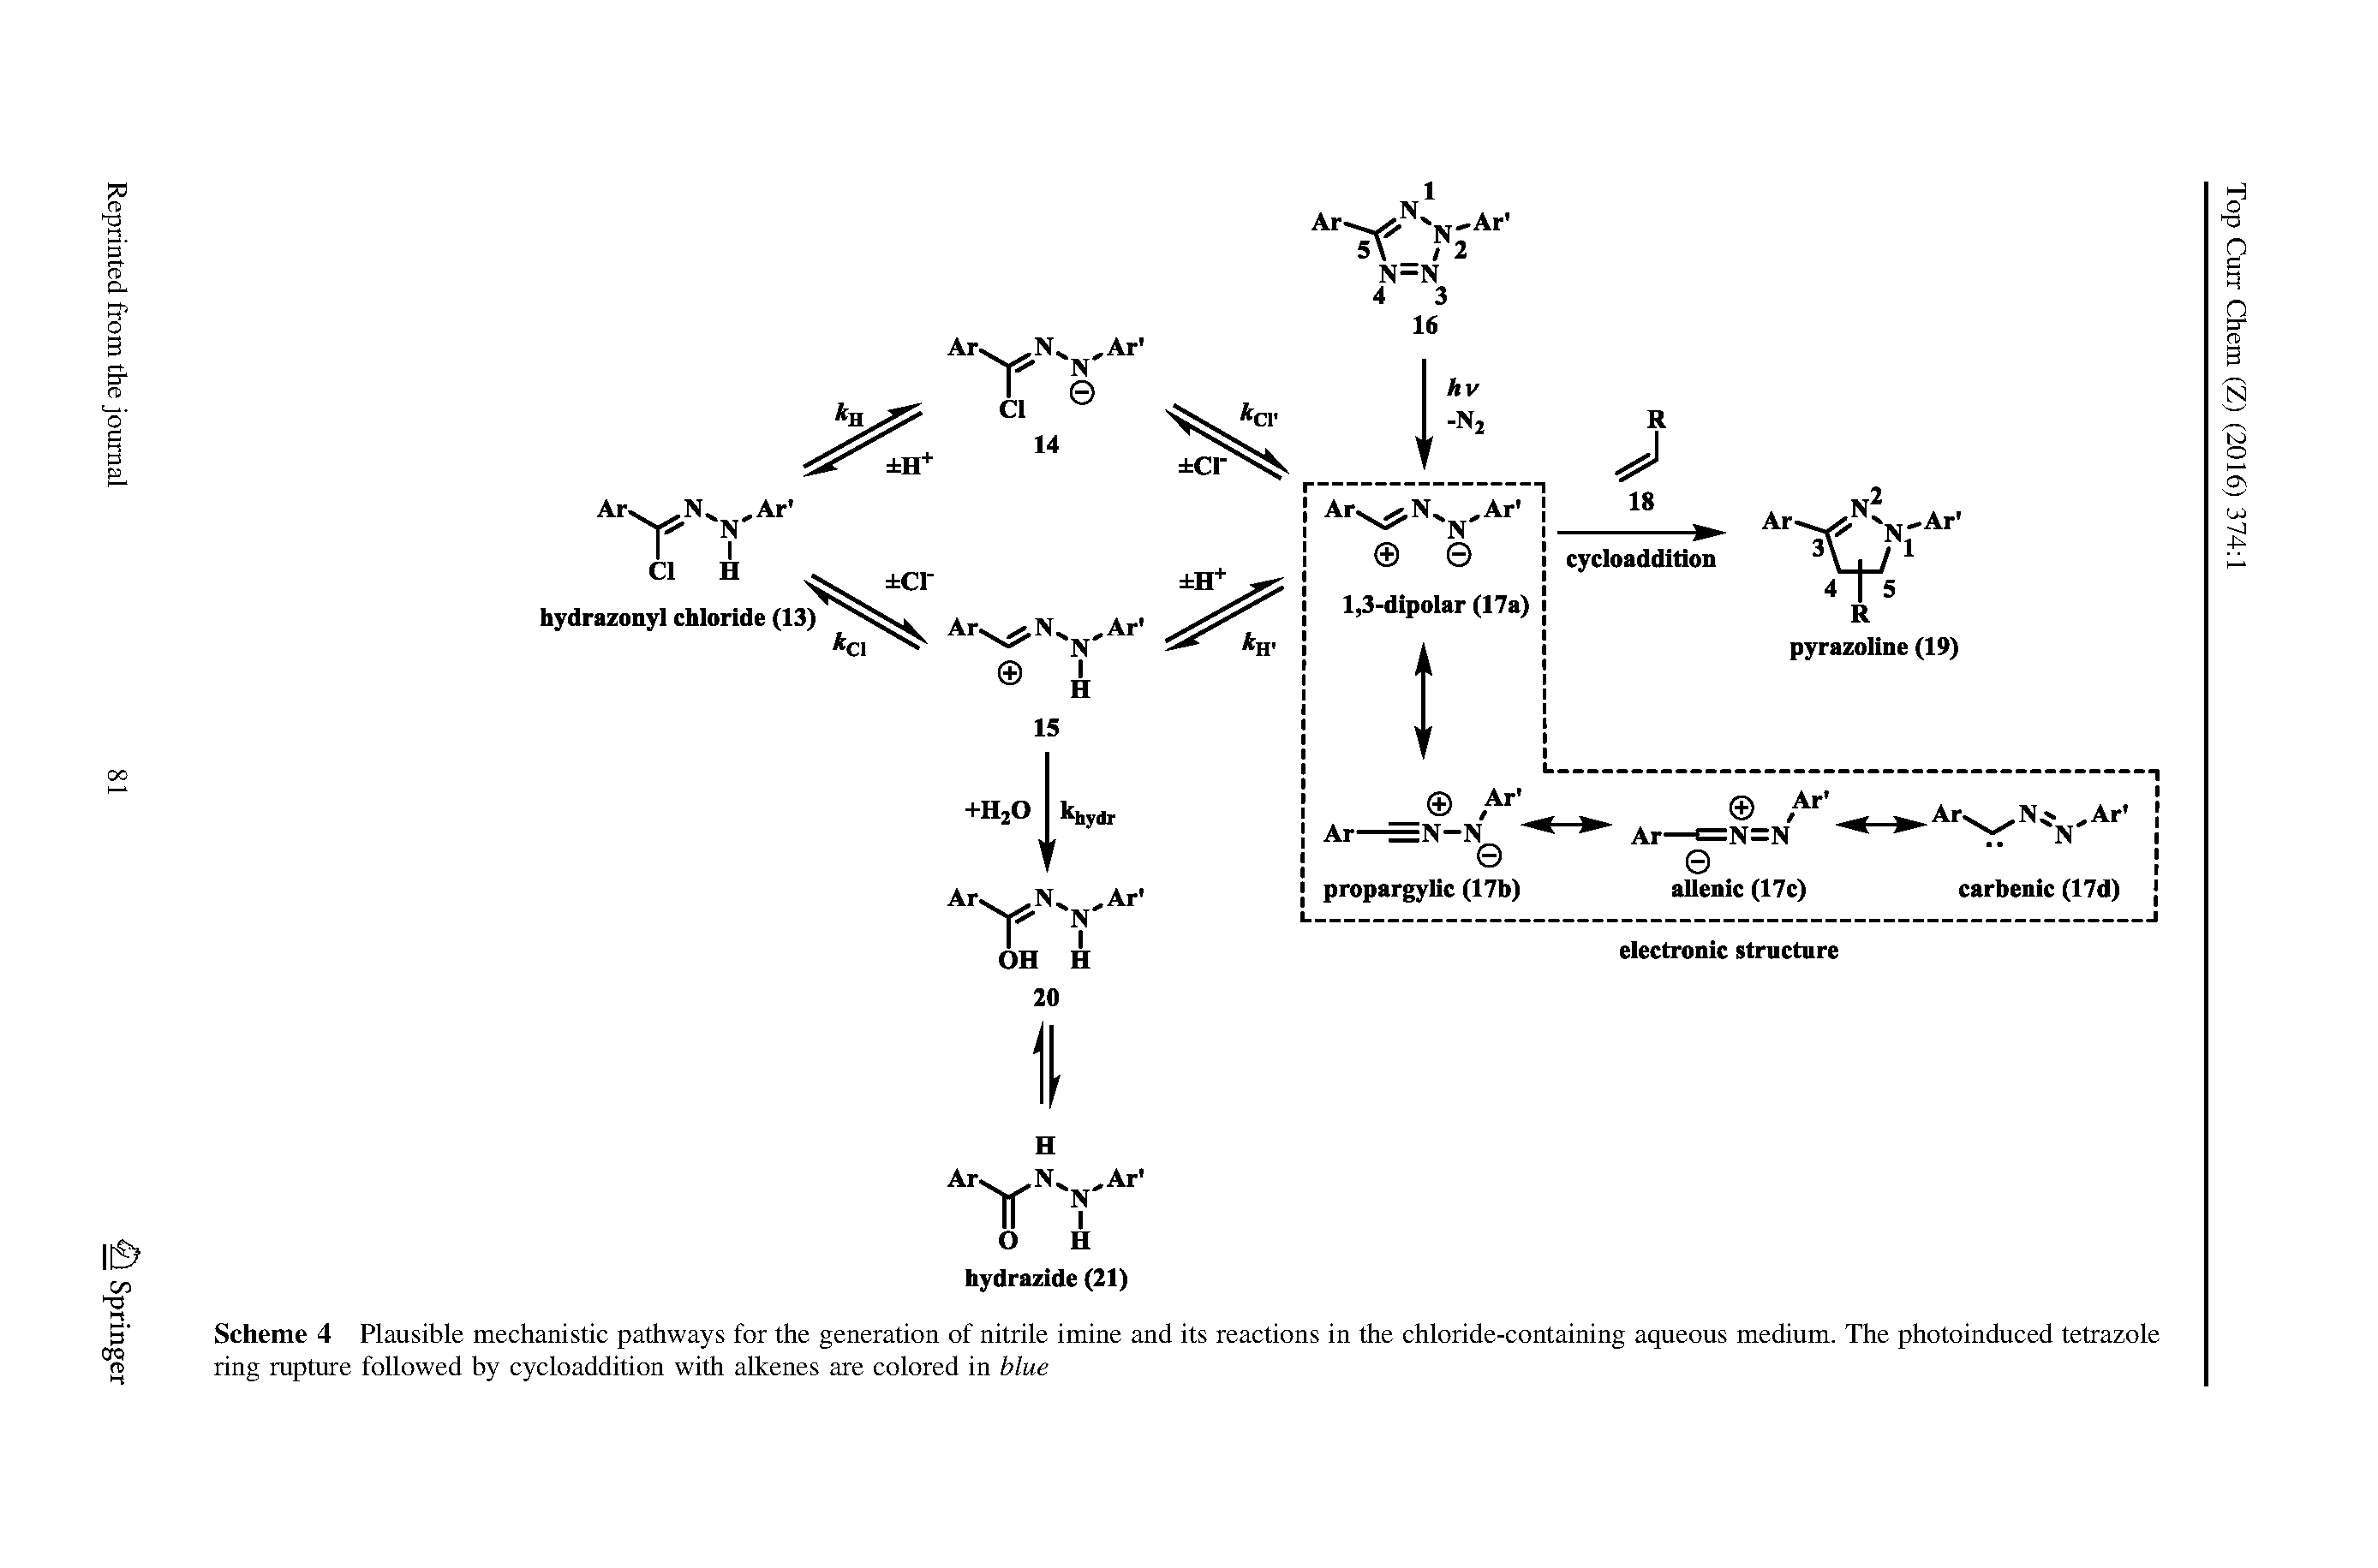 Scheme 4 Plausible mechanistic pathways for the generation of nitrile imine and its reactions in the chloride-containing aqueous medium. The photoinduced tetrazole ring rupture followed by cycloaddition with aUcenes are colored in blue...